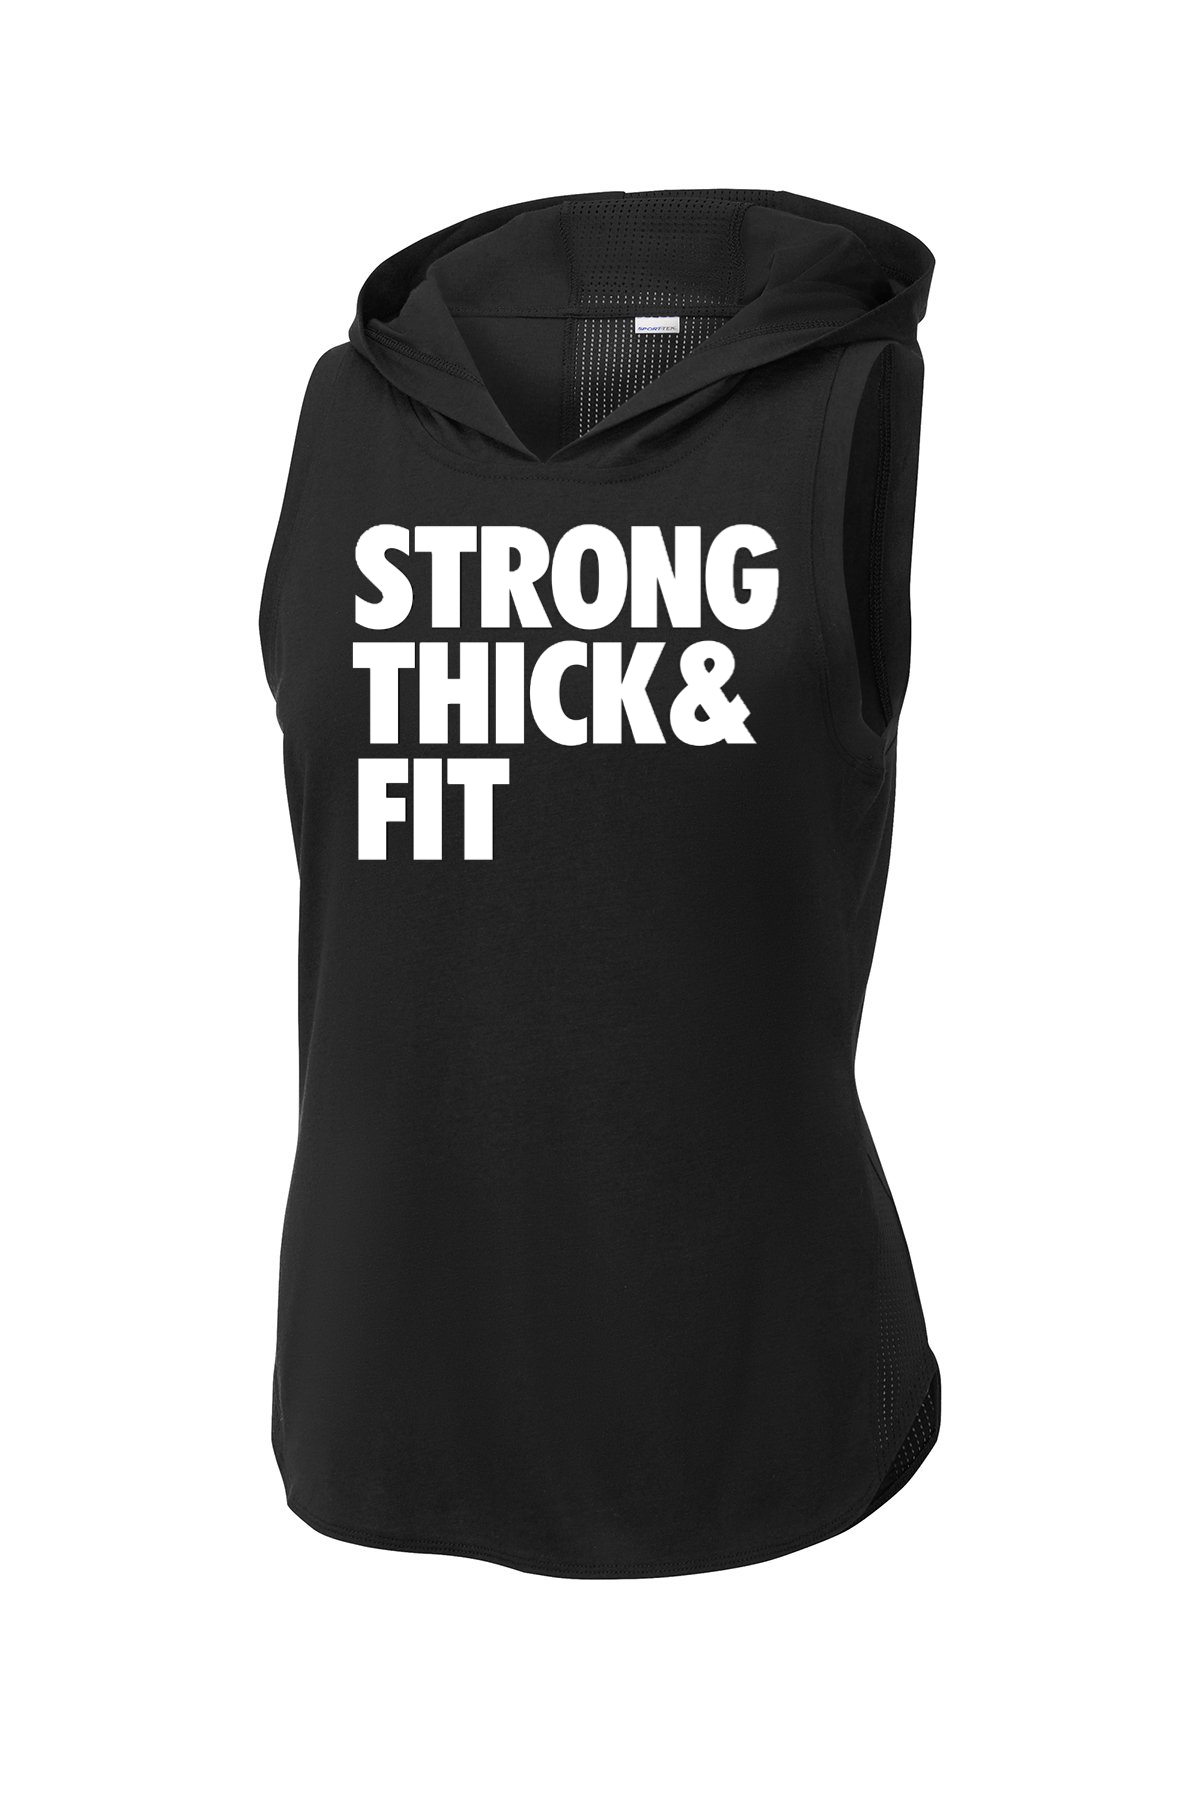 Strong Thick Fit  Fitness Hoodie Tank Top